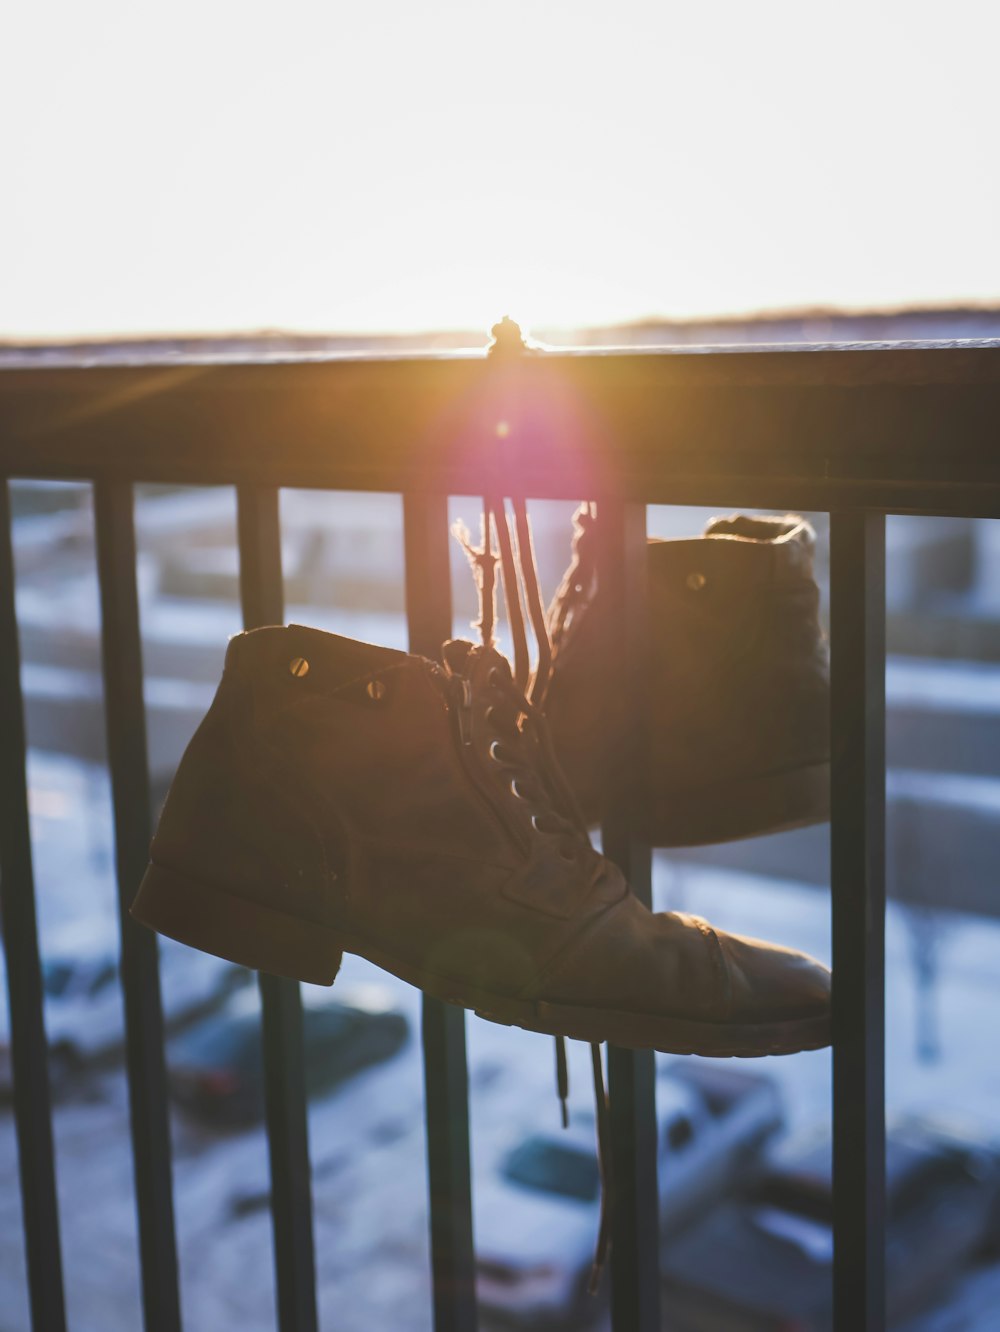 brown leathers shoes hanged on black railings